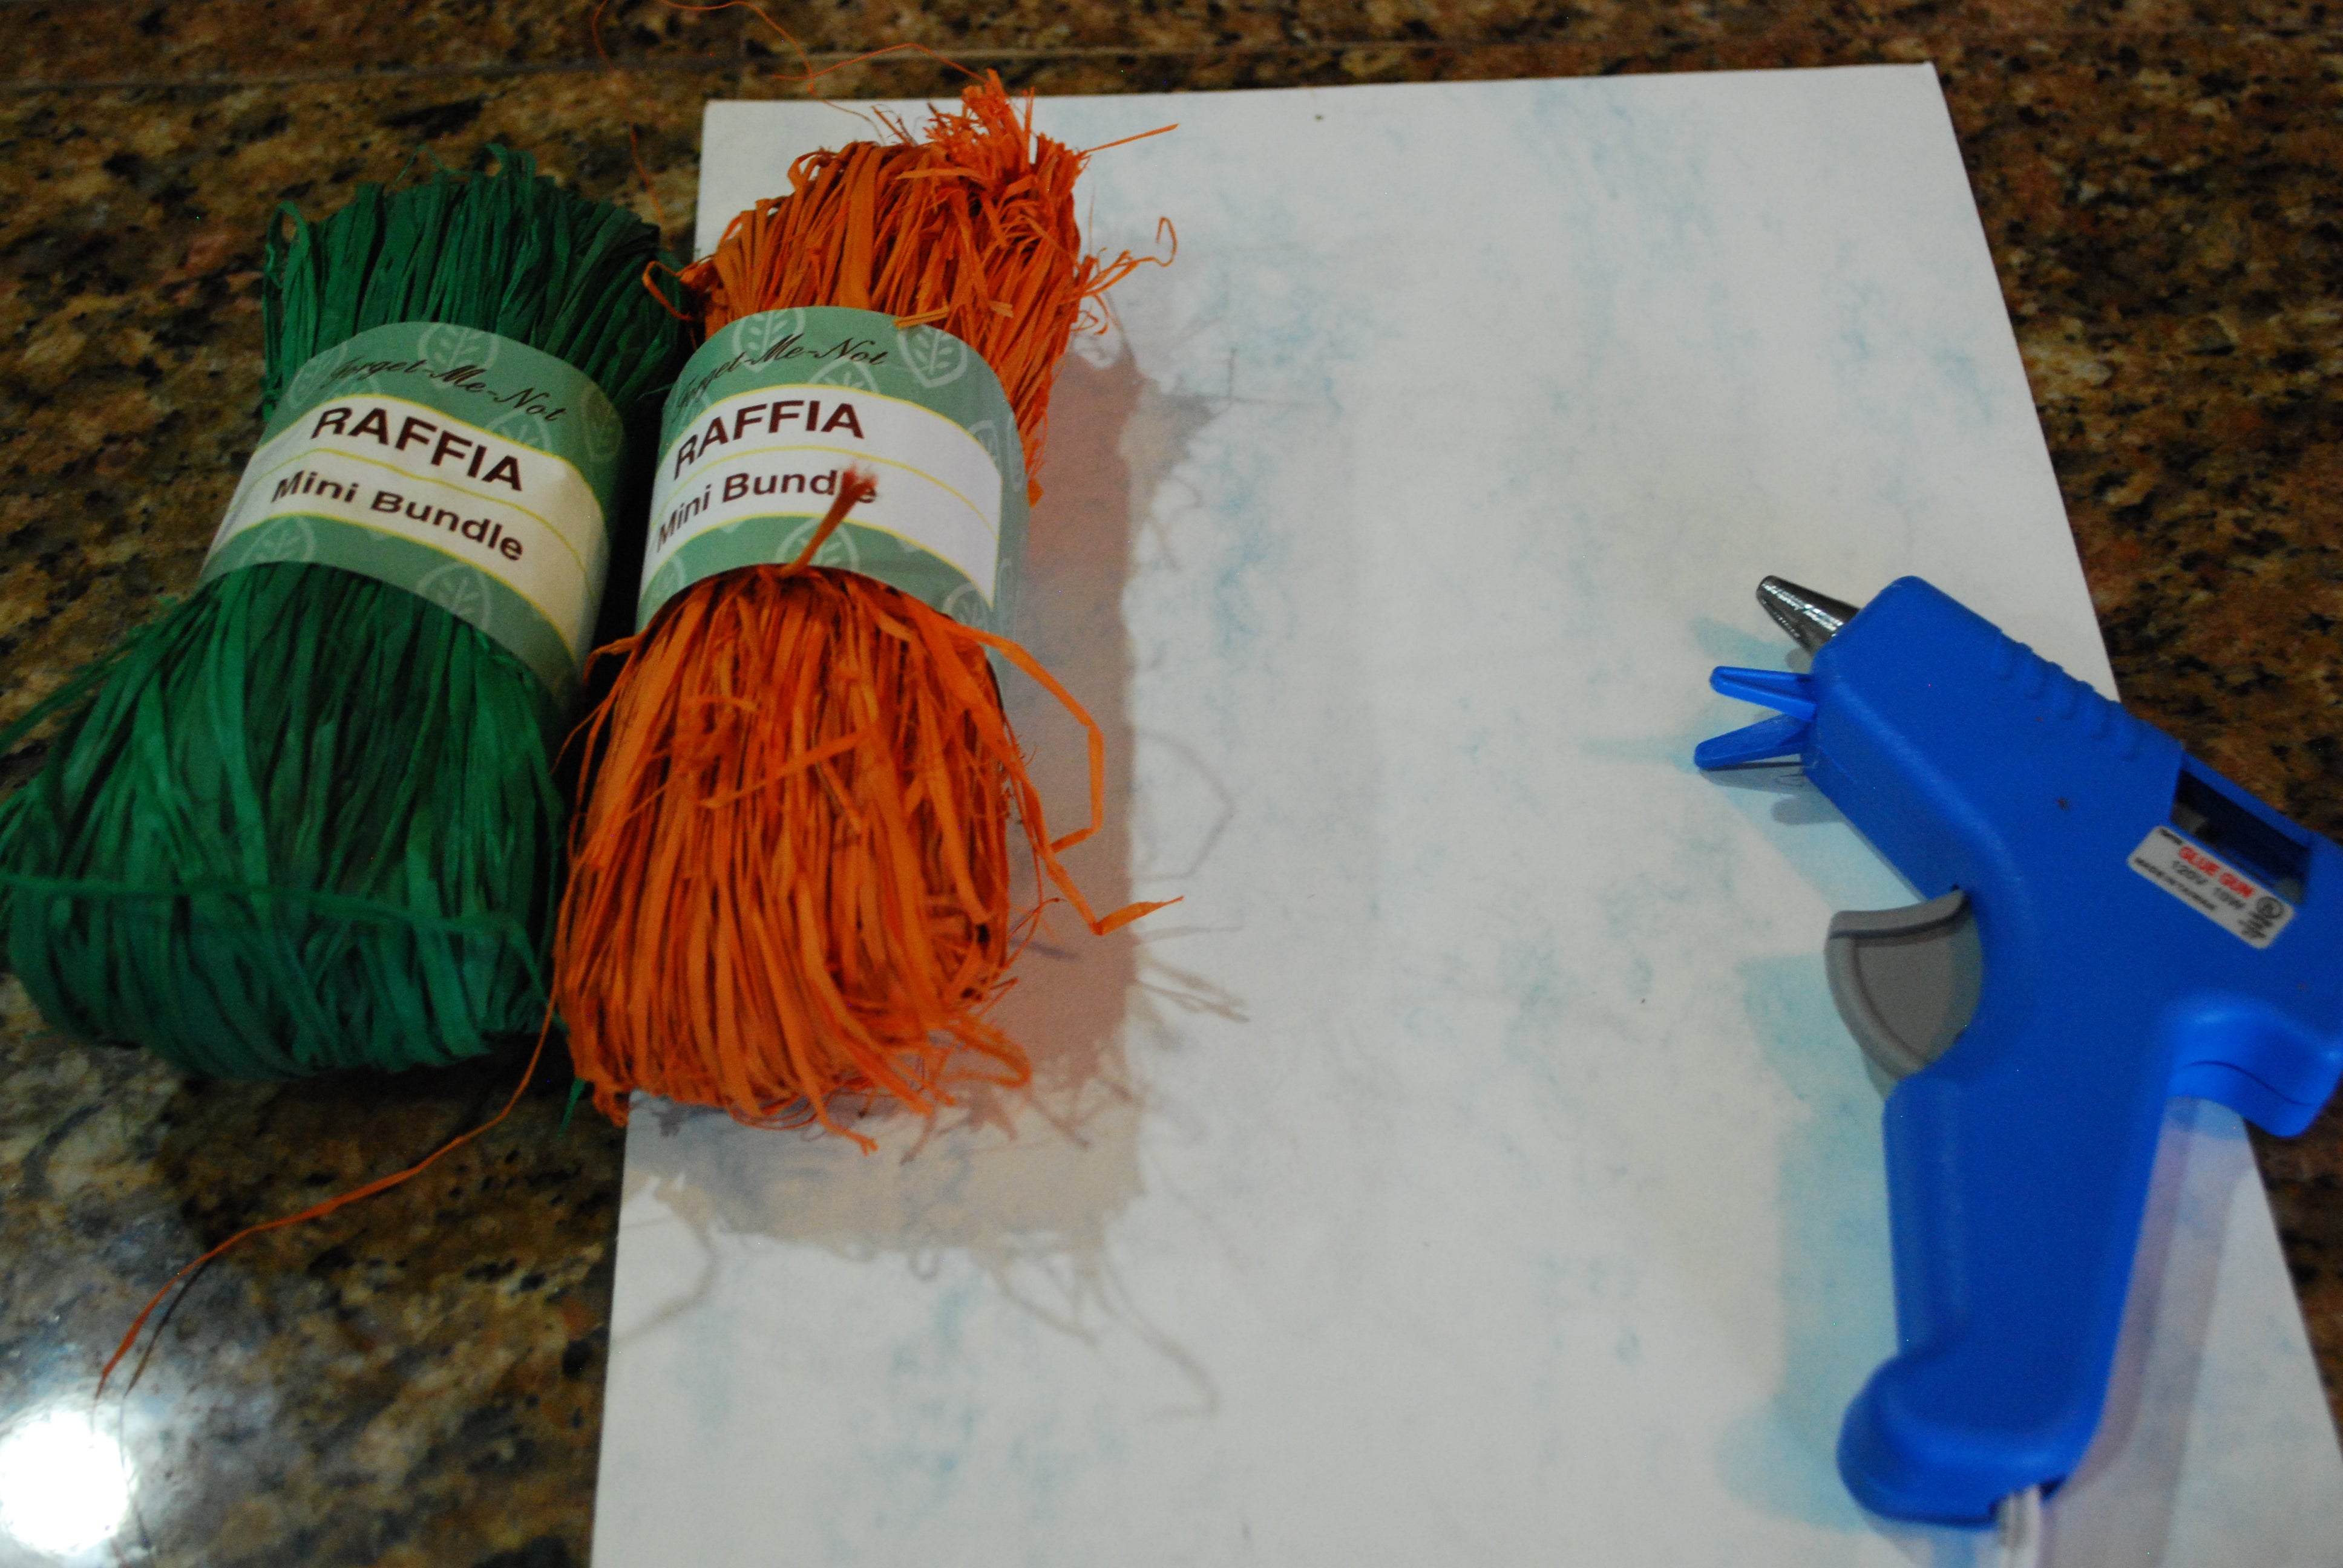 Supplies to make raffia carrots for Easter.